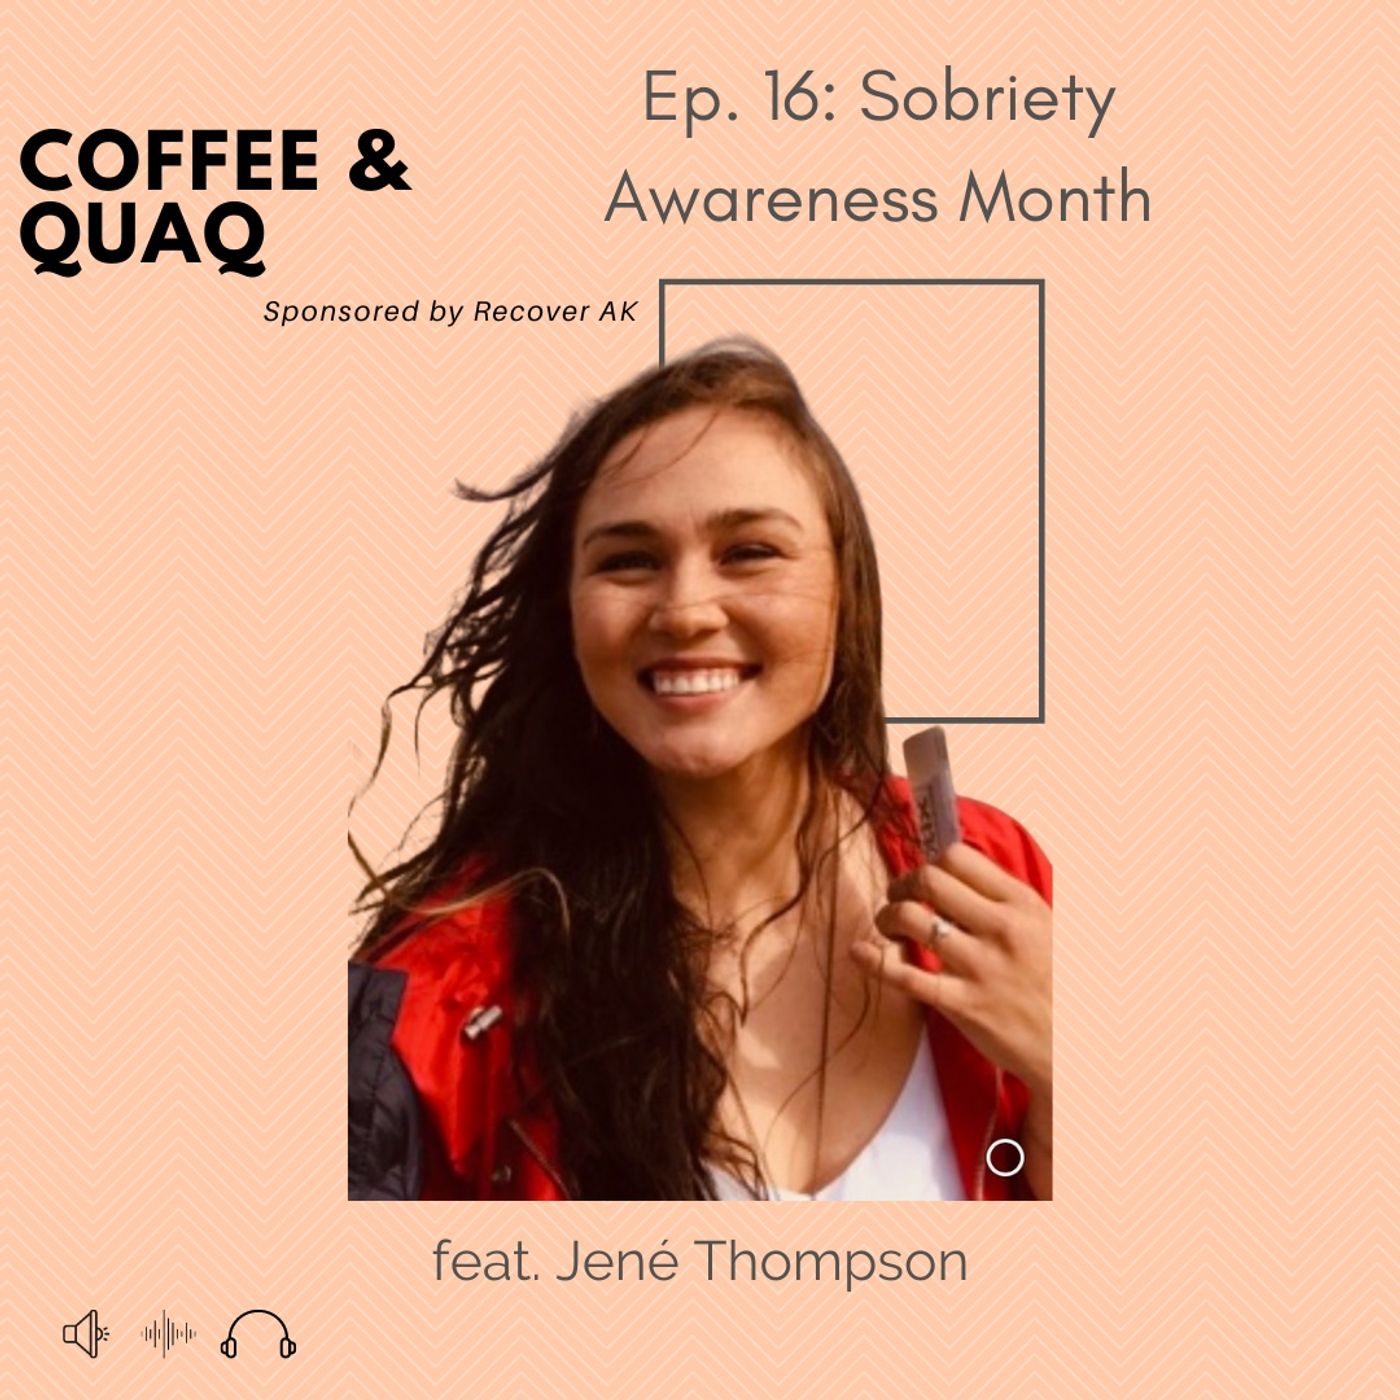 Episode 16: Sobriety Awareness Month